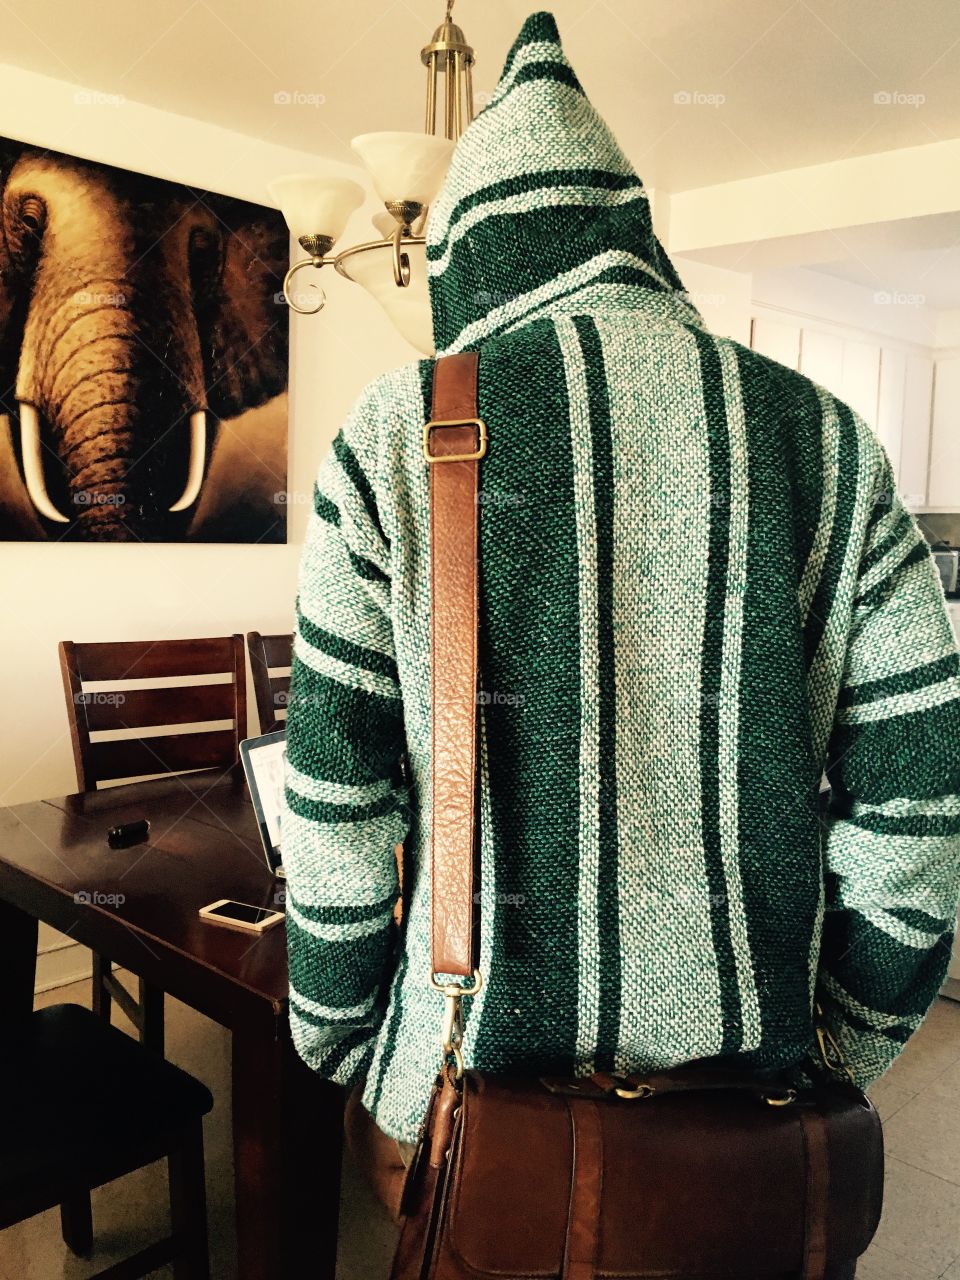 Man from behind 